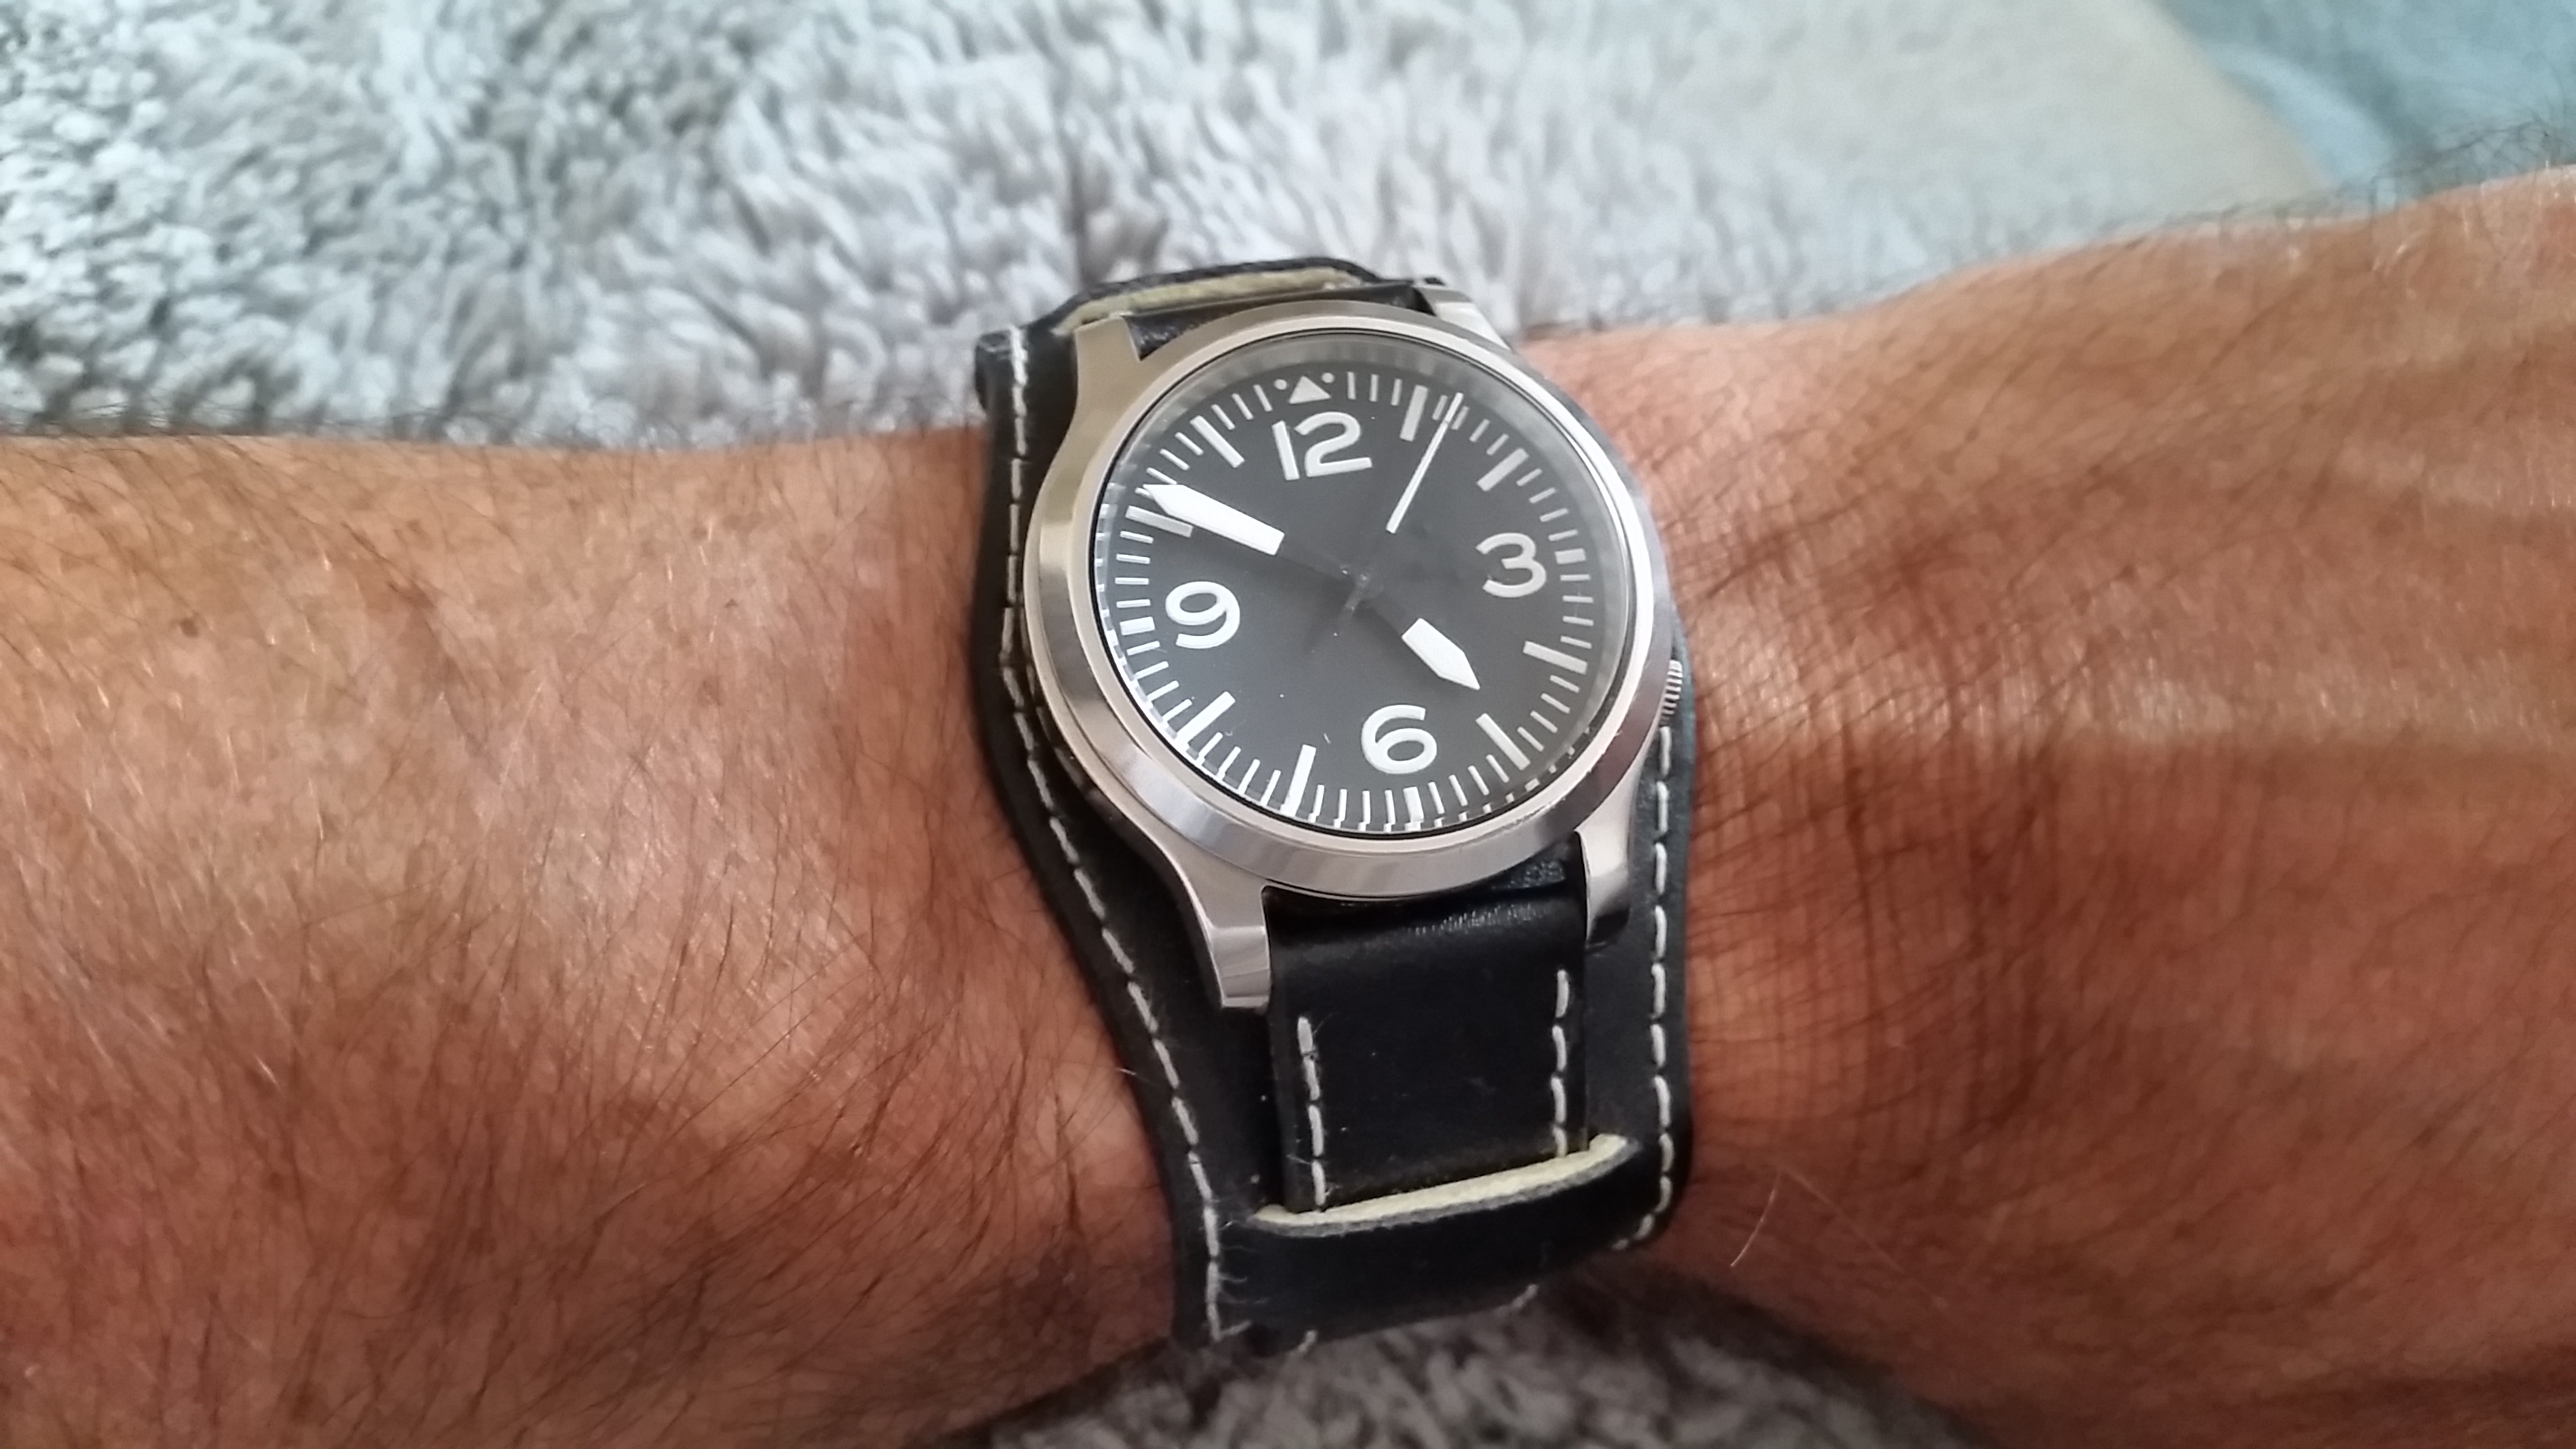 Let's see your Seikos! - Page 149 - Watches - PistonHeads